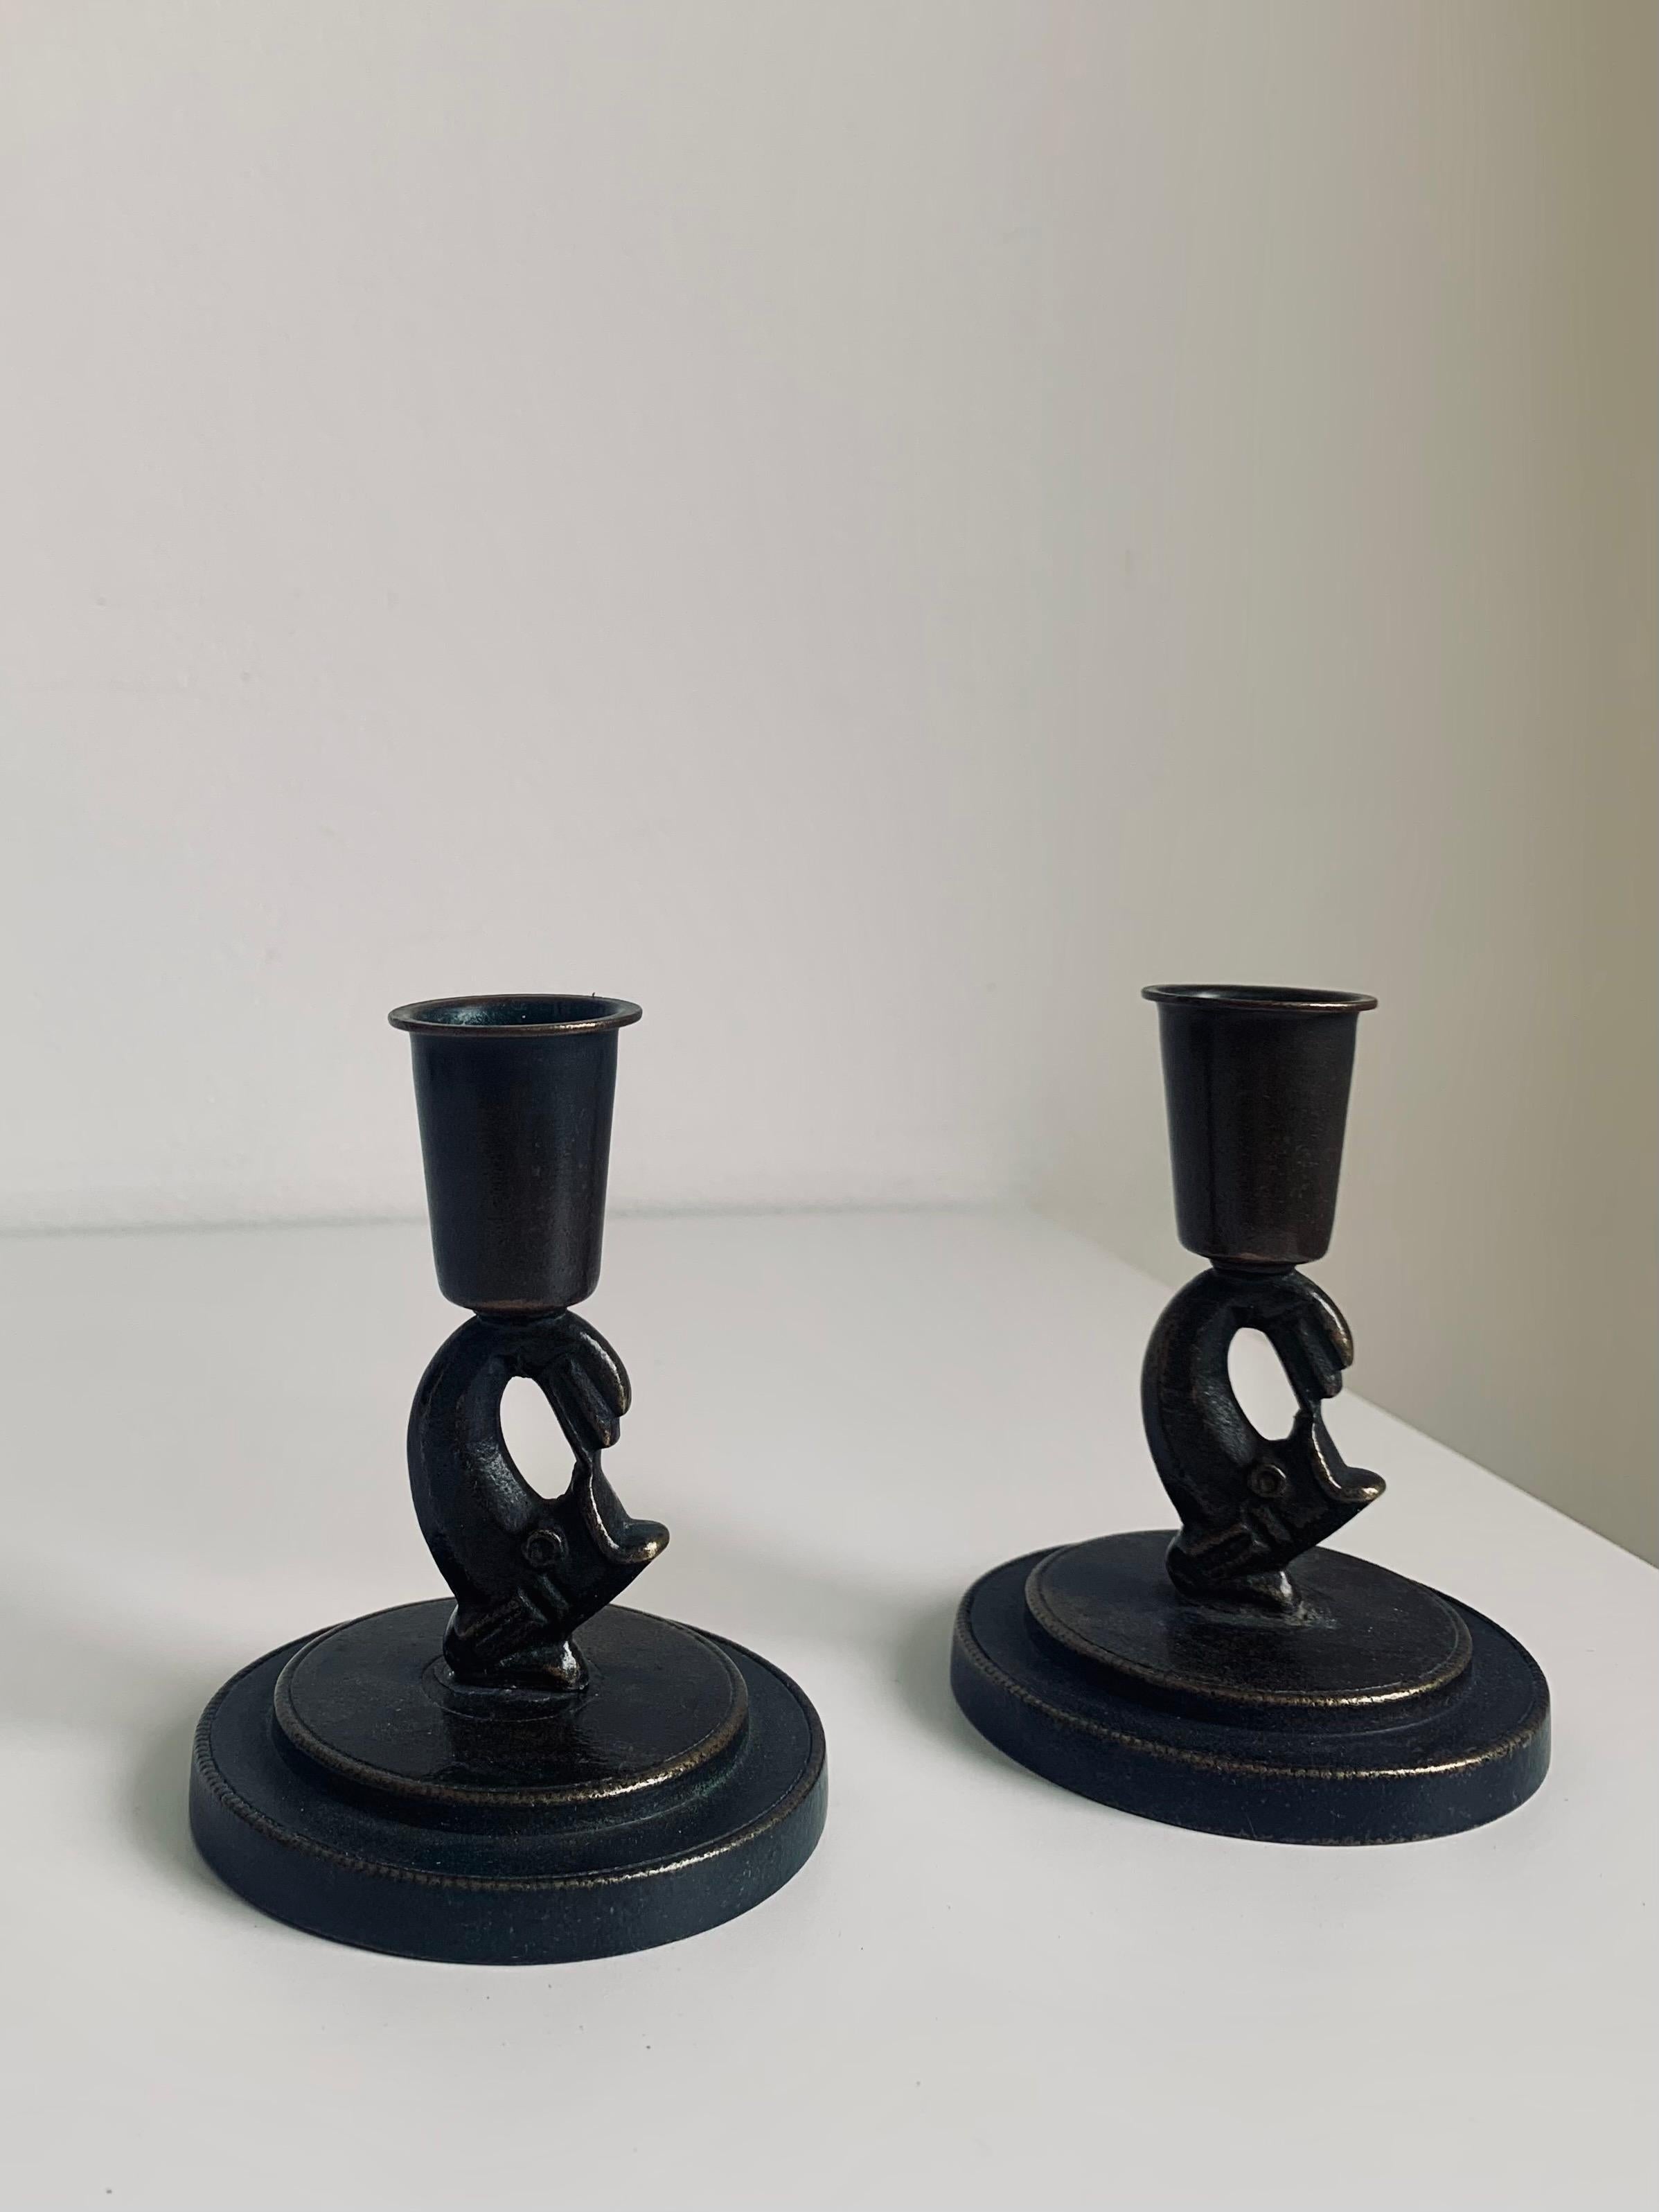 Dark patinated bronze candle sticks by Ystad Brons, ca 1930s. Likely designed by Carl-Einar Borgström as part of a desk set. 
Stylised fish holding the candle. Typical of Swedish Modern design. Nice dark brown patina. Stamped Ystad Brons Sweden.